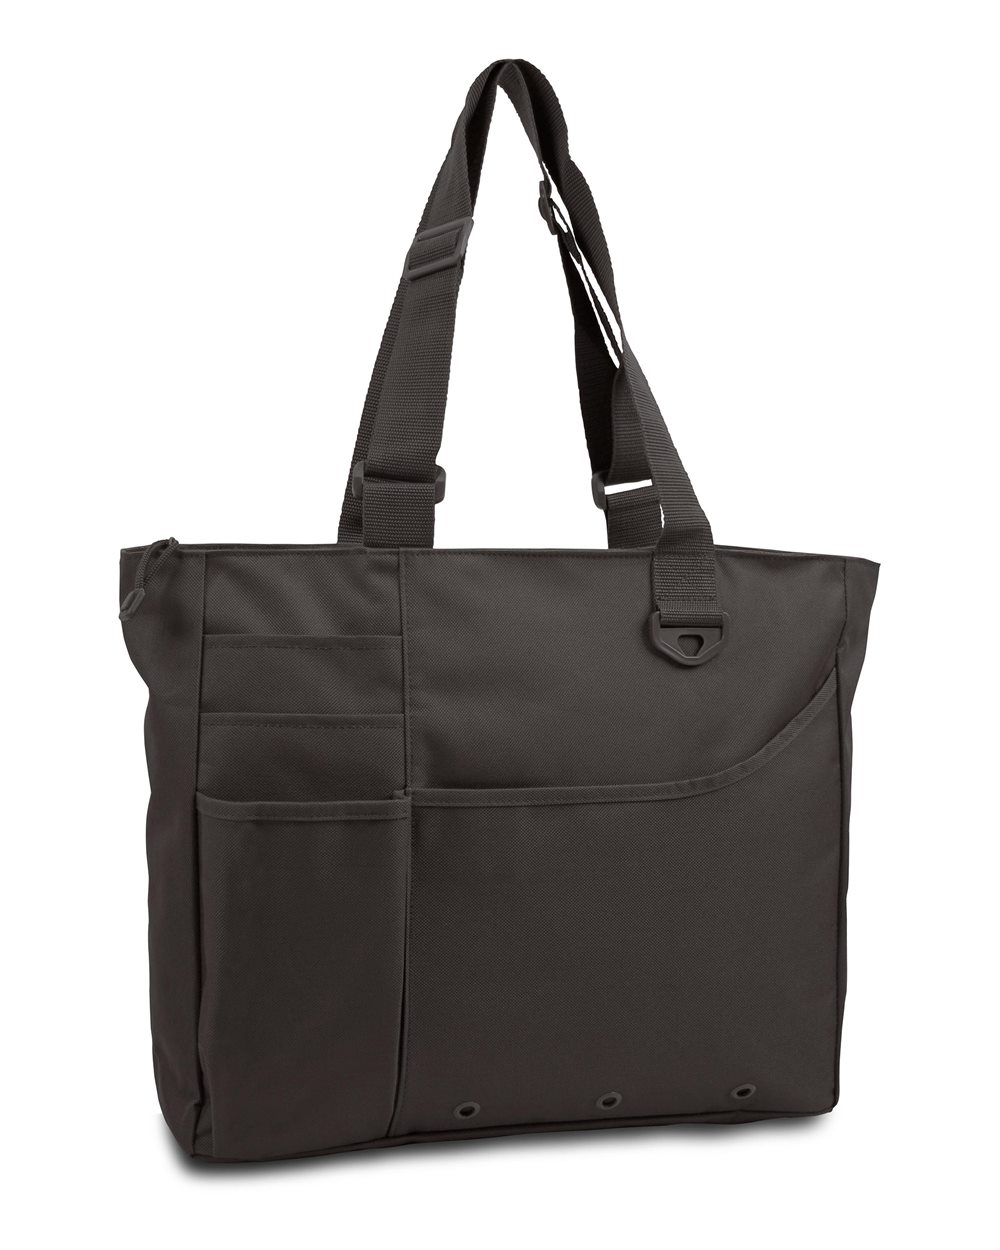 Liberty Bags 8811-Super Feature Tote